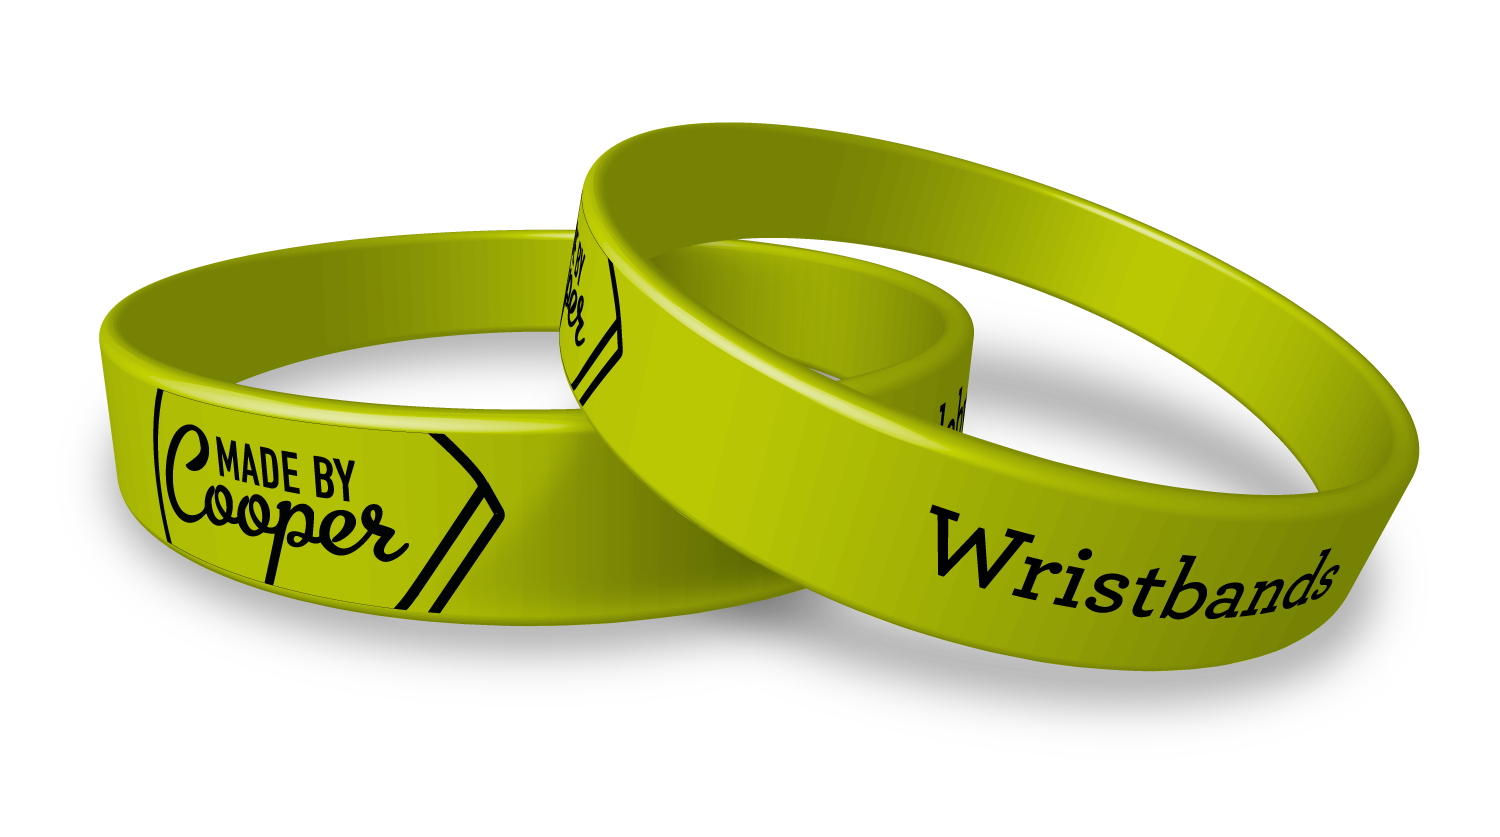 Two green silicone wristbands with the Made by Cooper logo and the word 